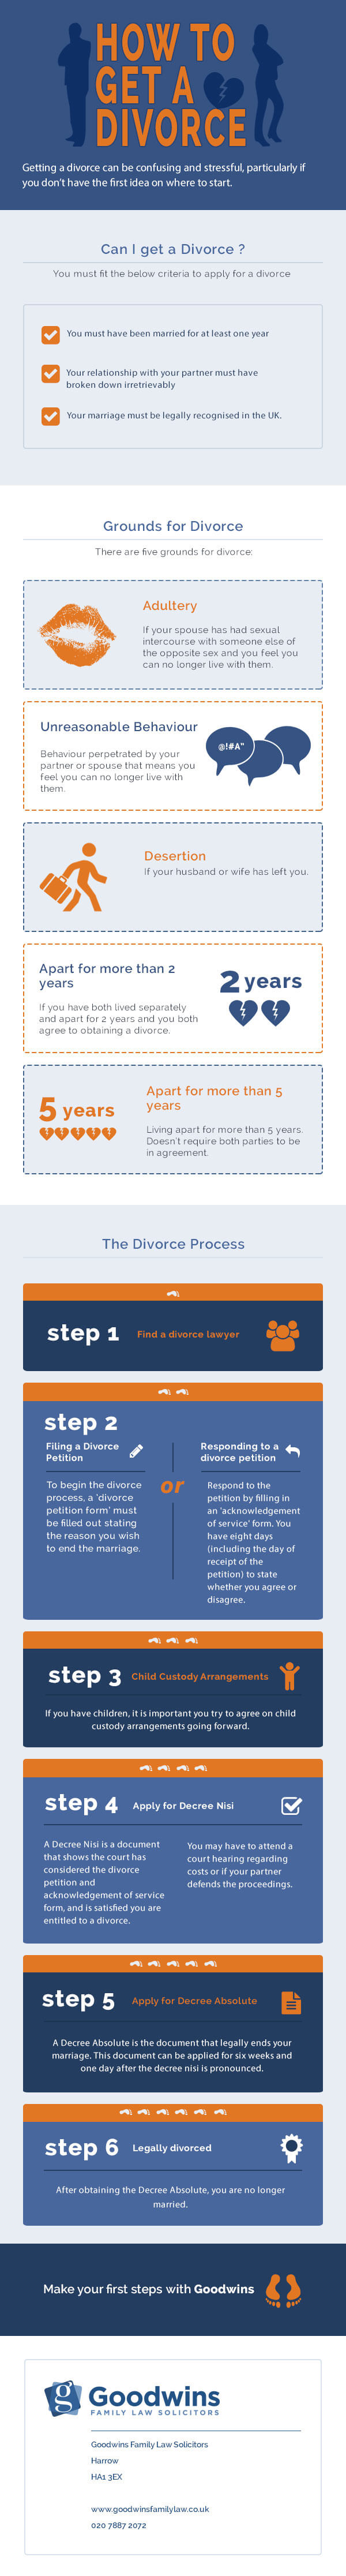 How to get a Divorce - The Divorce Process in England and Wales